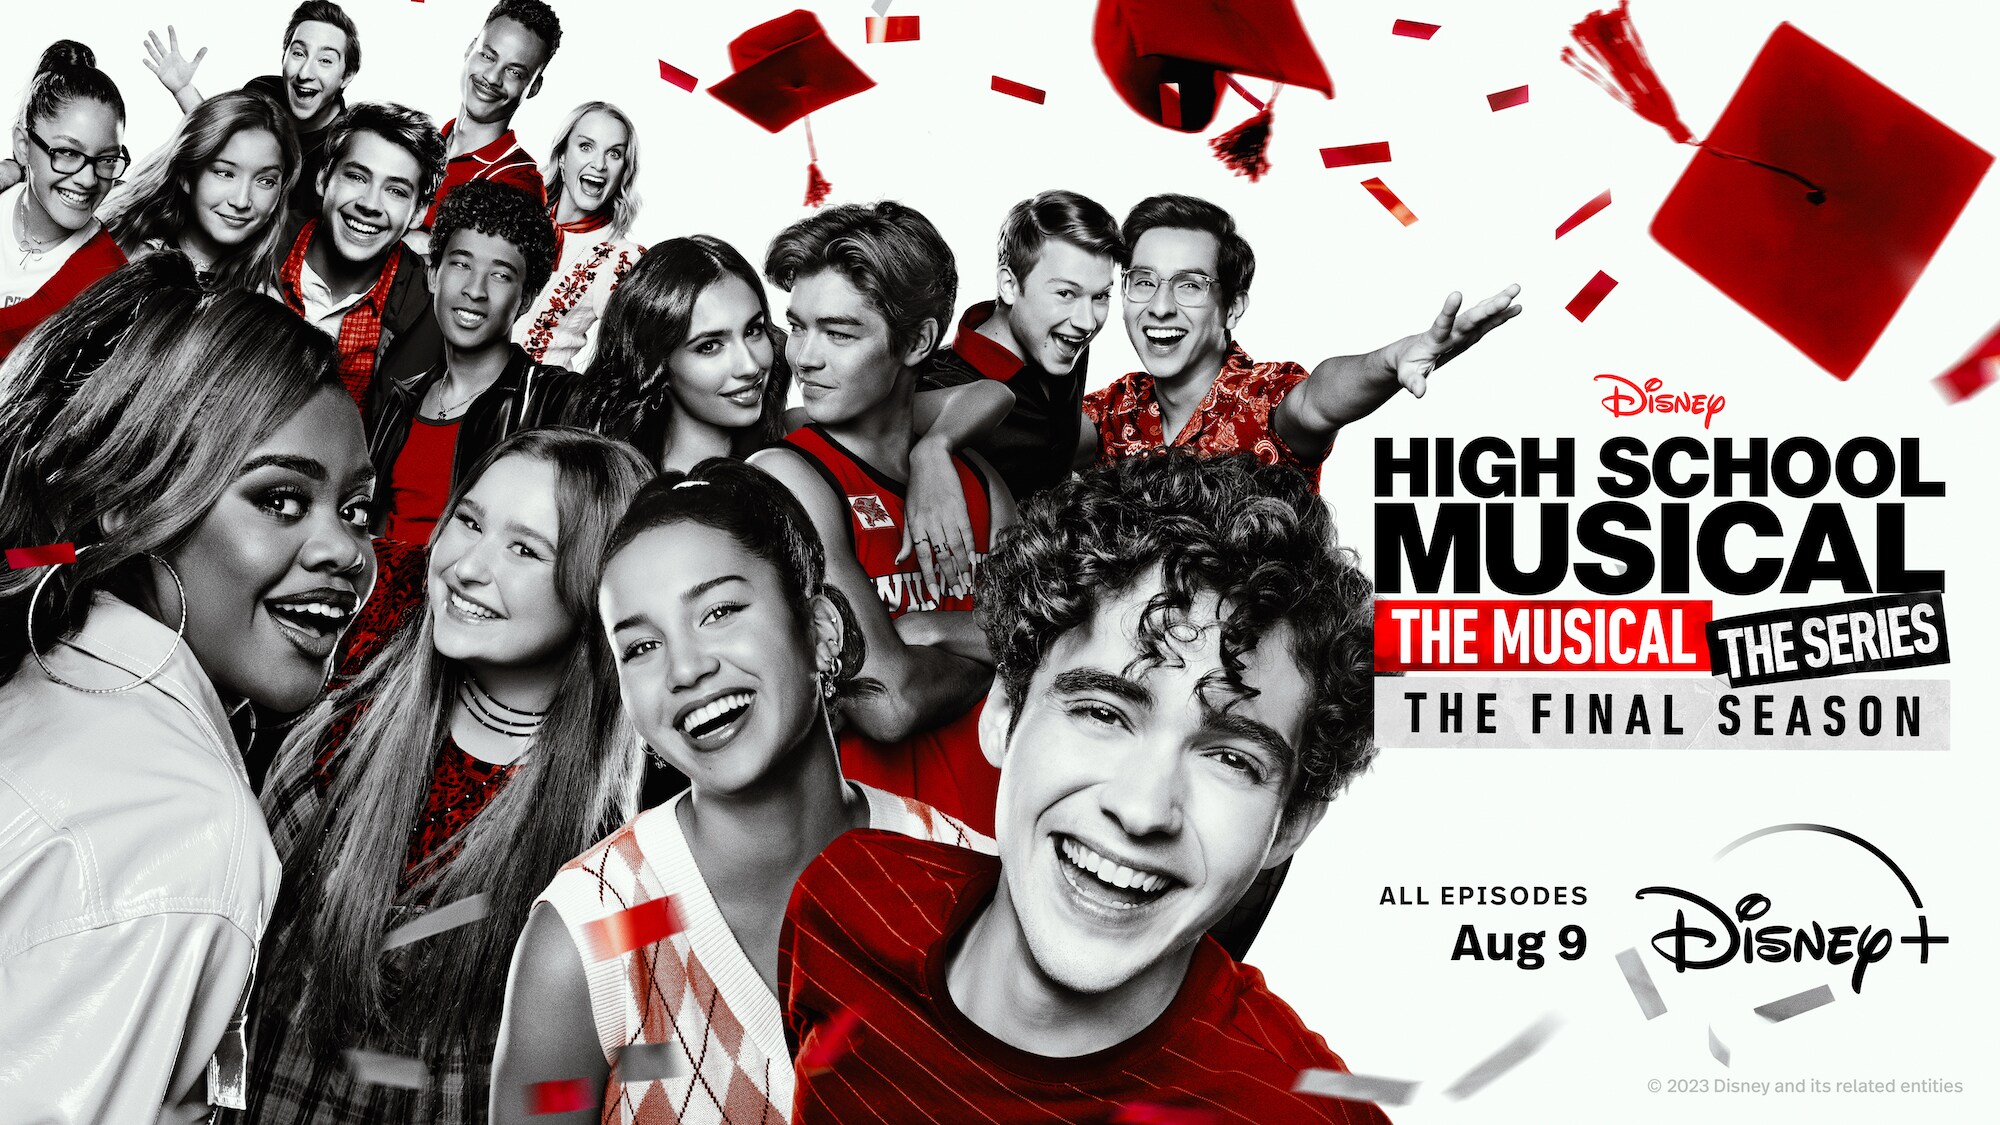 School Four Never! Of The “High Anticipated Of Disney Ahead August Highly 9 It\'s Reveals Official Musical: | Musical: Or Trailer Season Plus Premiere The Now Series” Press Disney+